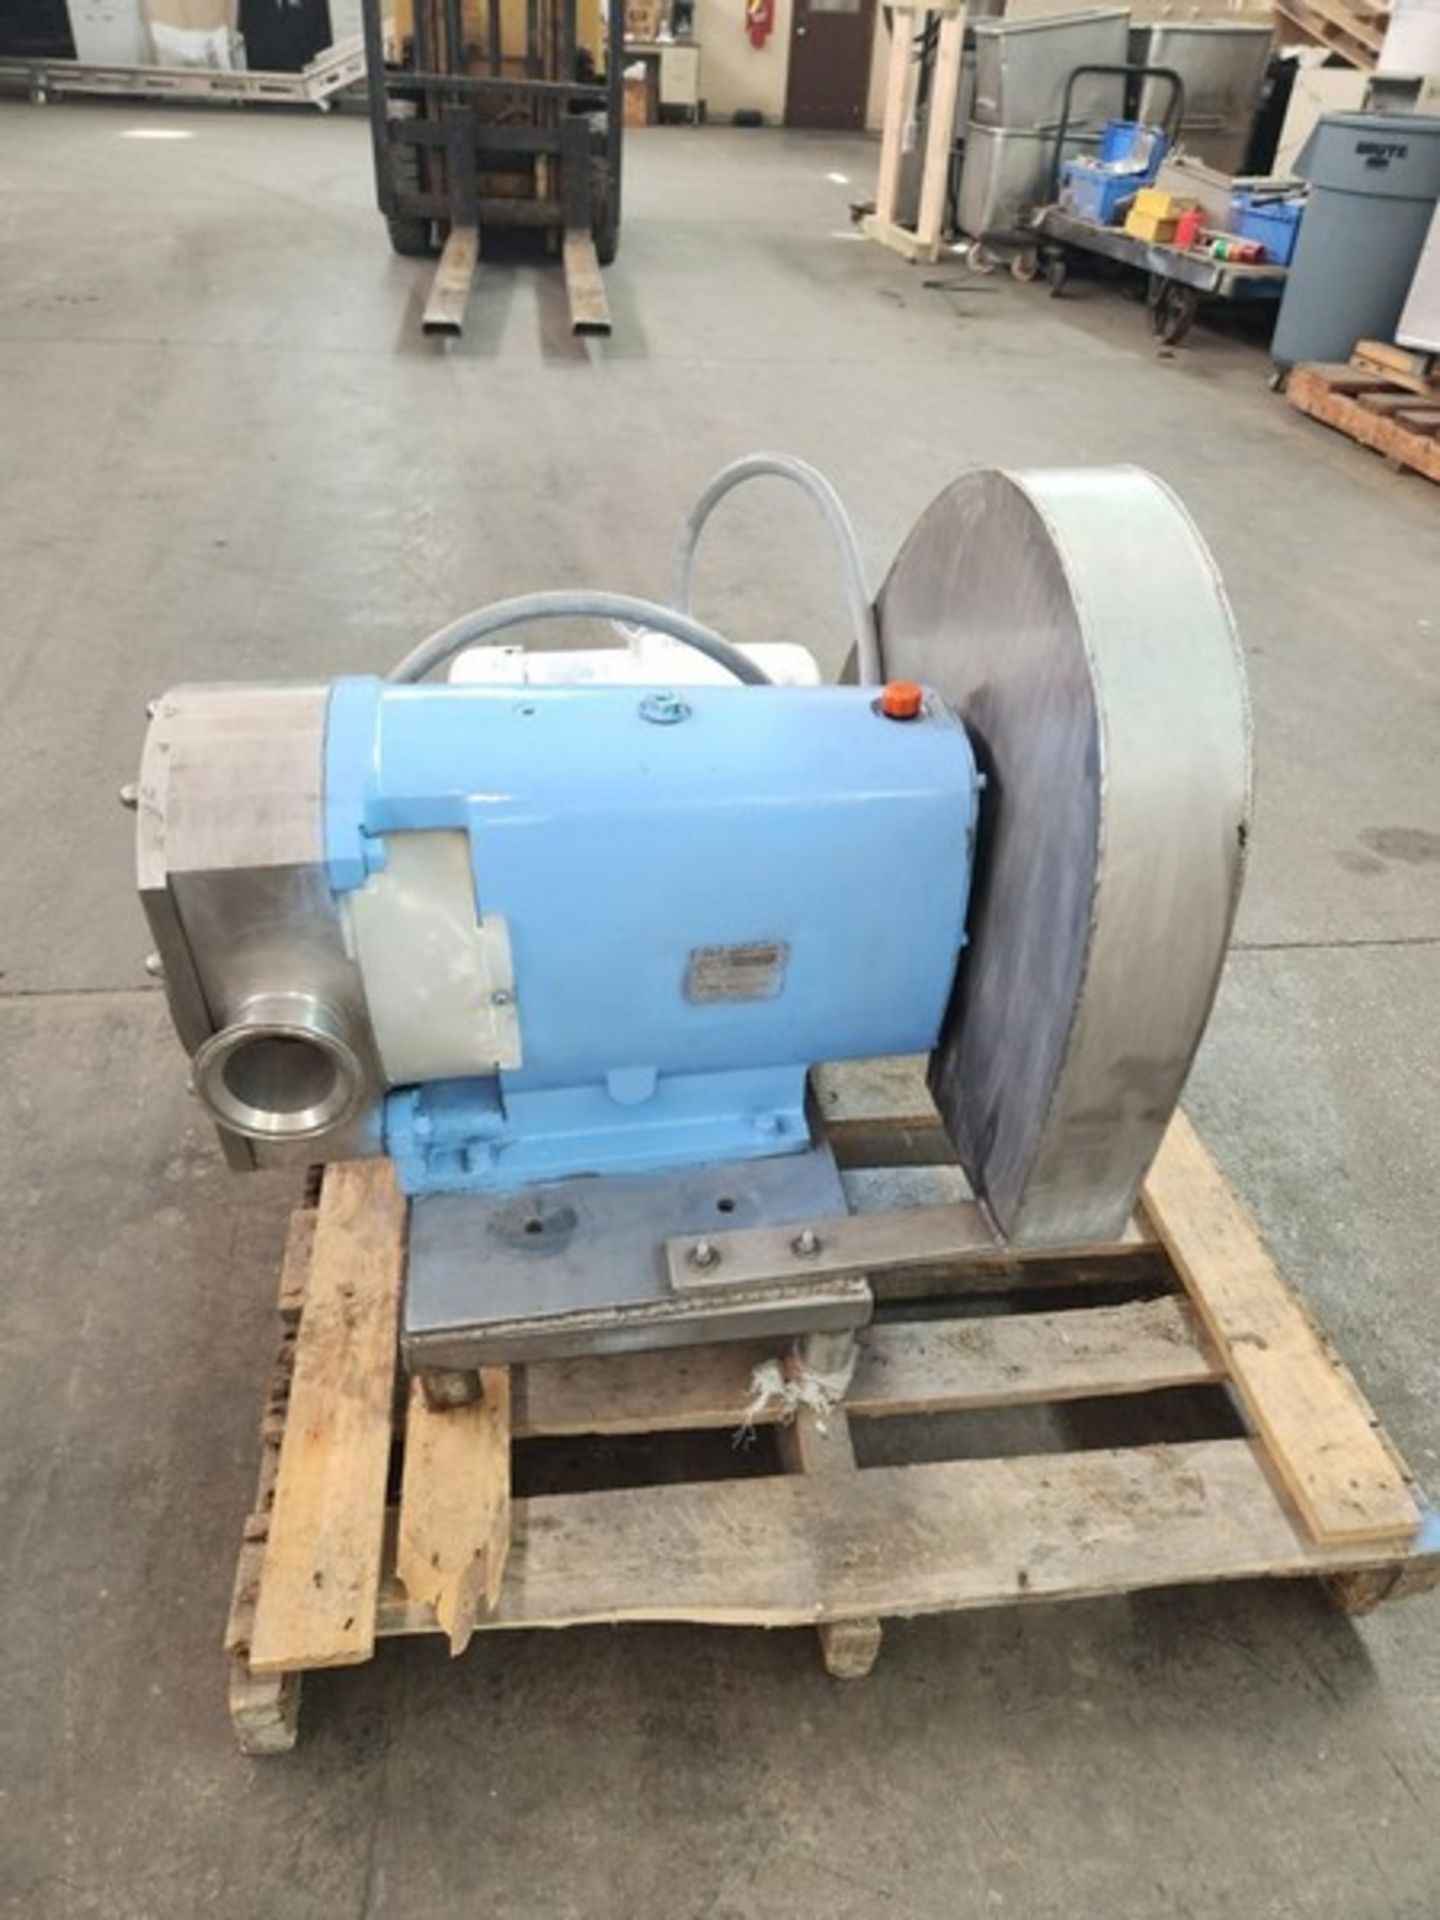 G & H (Alfa Laval) 7.5 hp 4" S/S Sanitary Positive Displacement Pump, Model 822, S/N 95-8-50174 with - Image 15 of 15